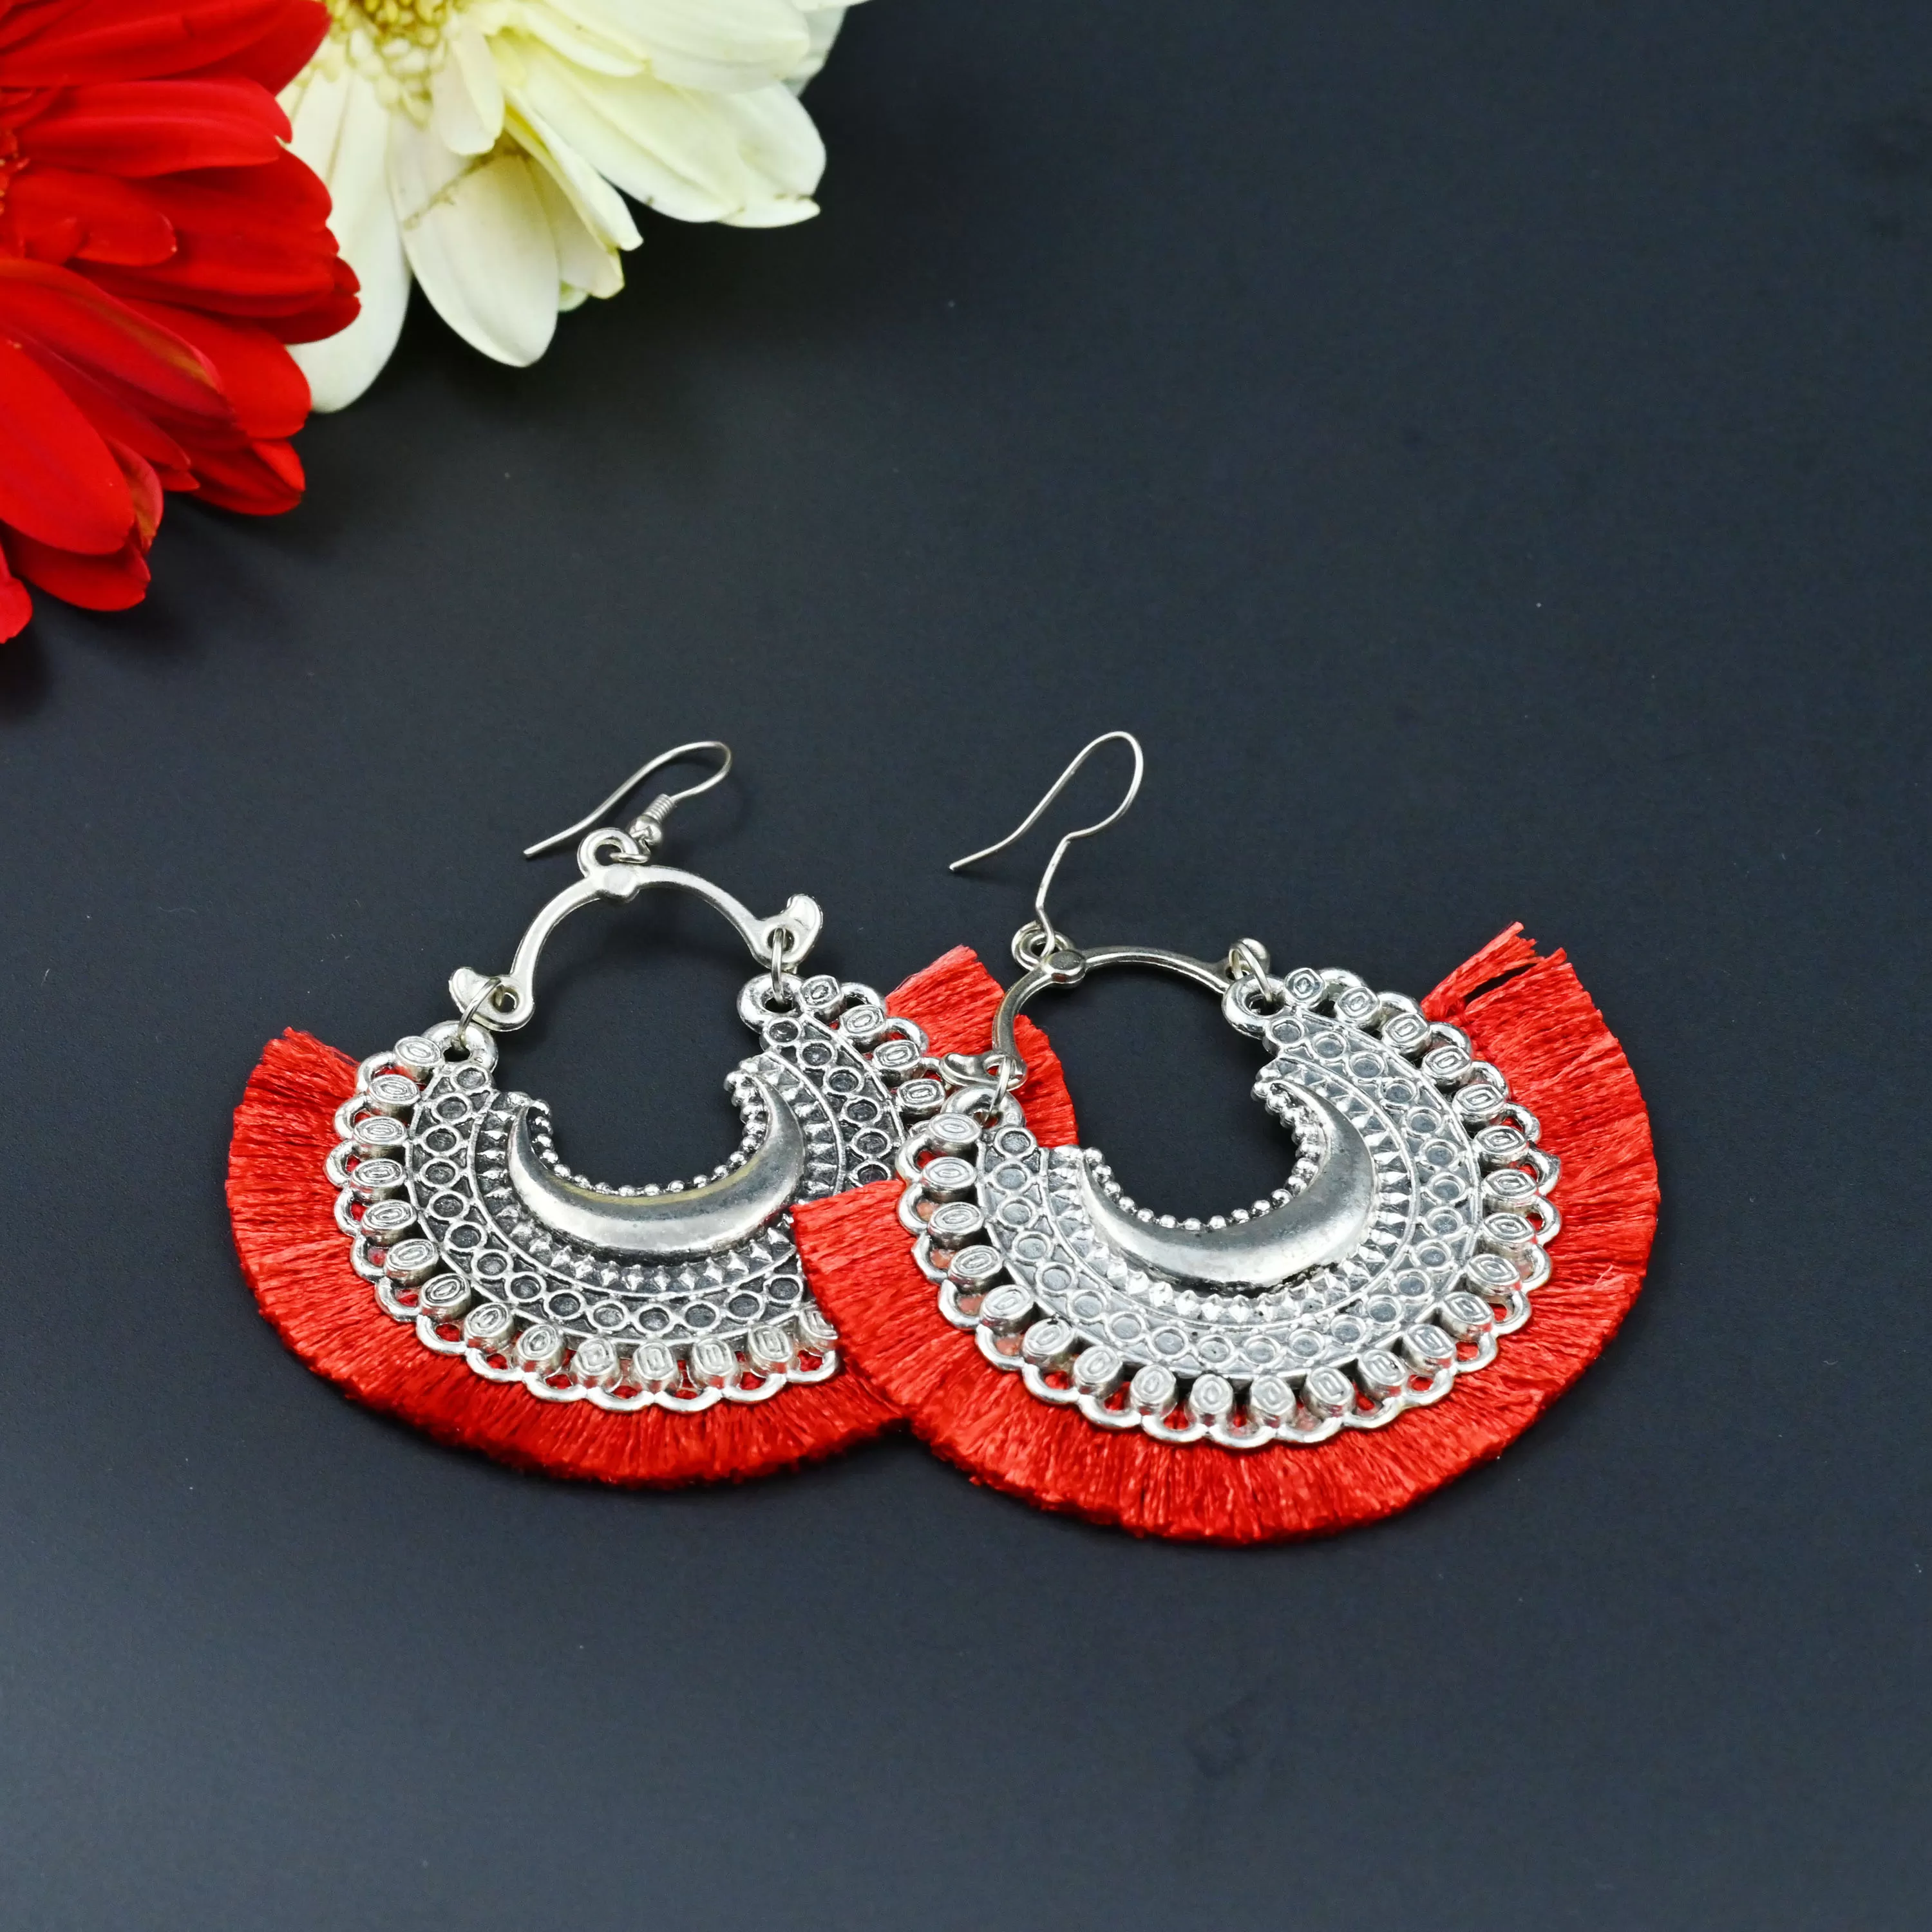 Women's Oxidized Crescent Moon Earring with Red Thread Party Wear., 3 image